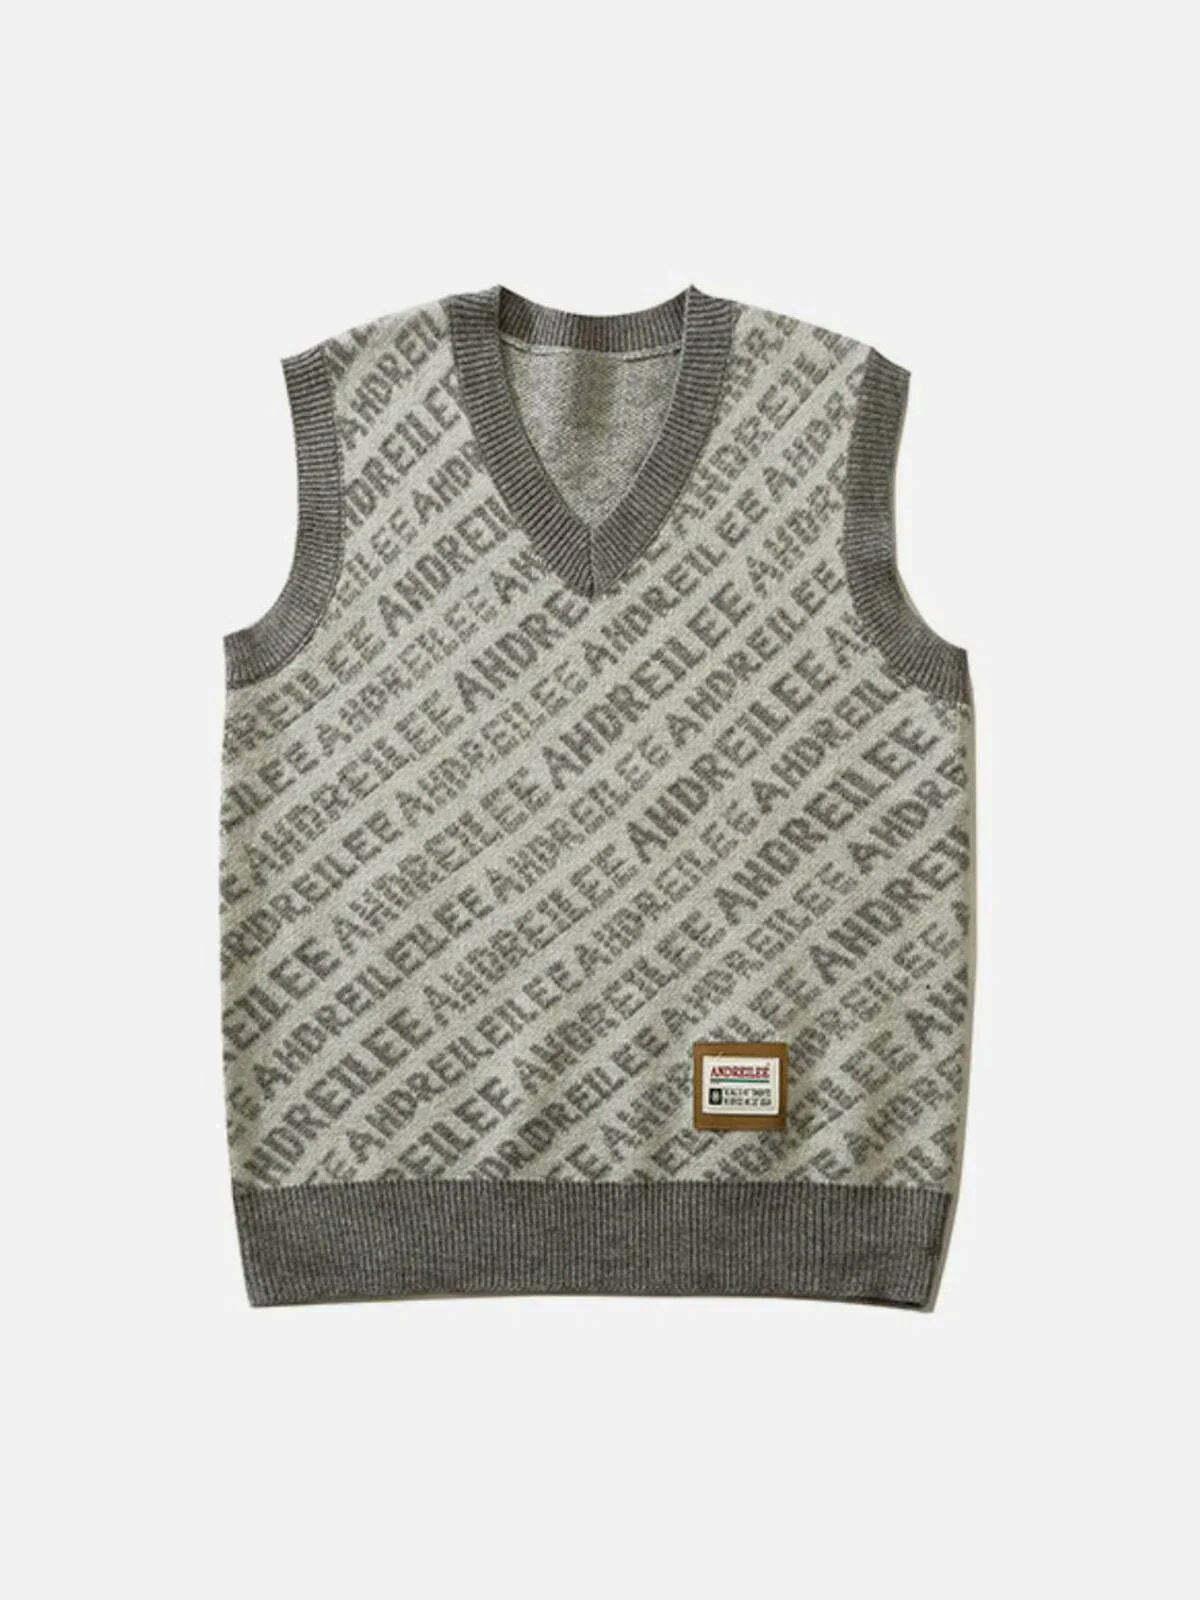 graphic letter print sweater vest edgy y2k streetwear 4670